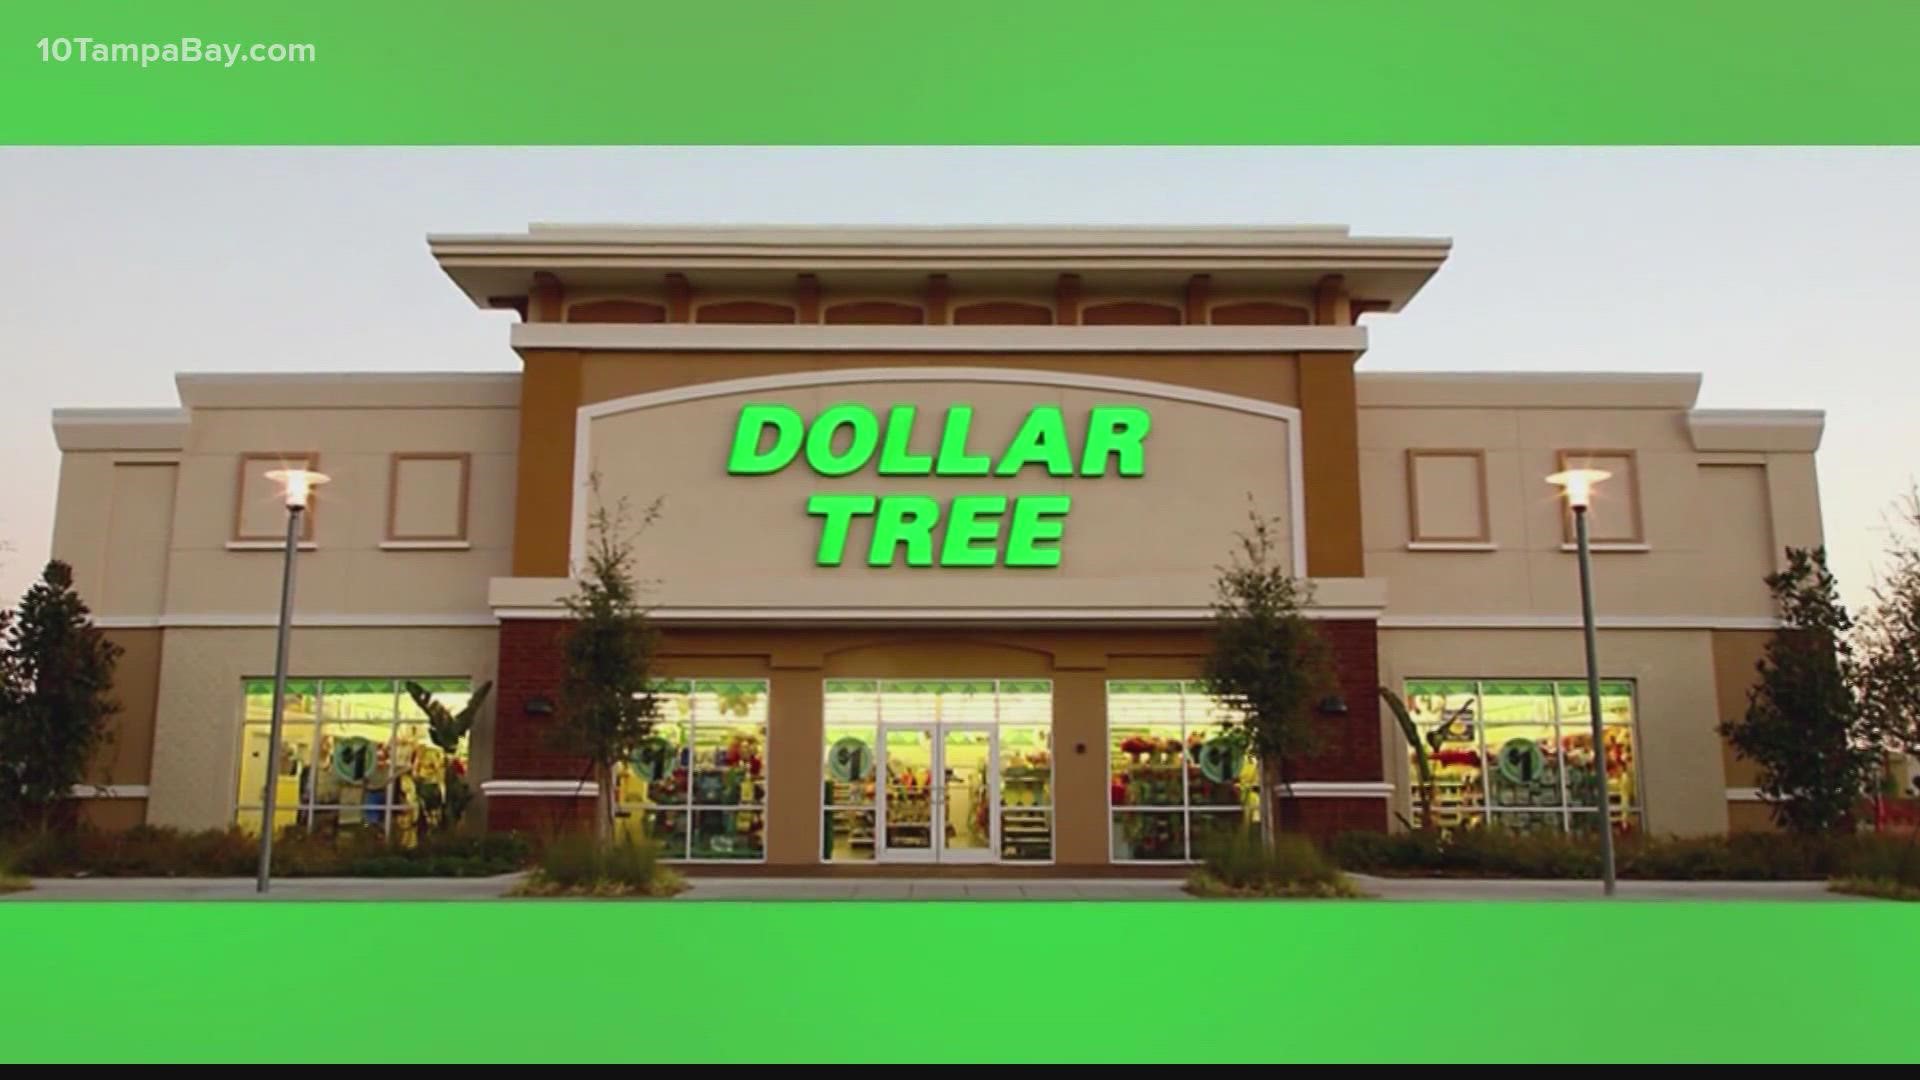 Dollar Tree raising prices in all stores